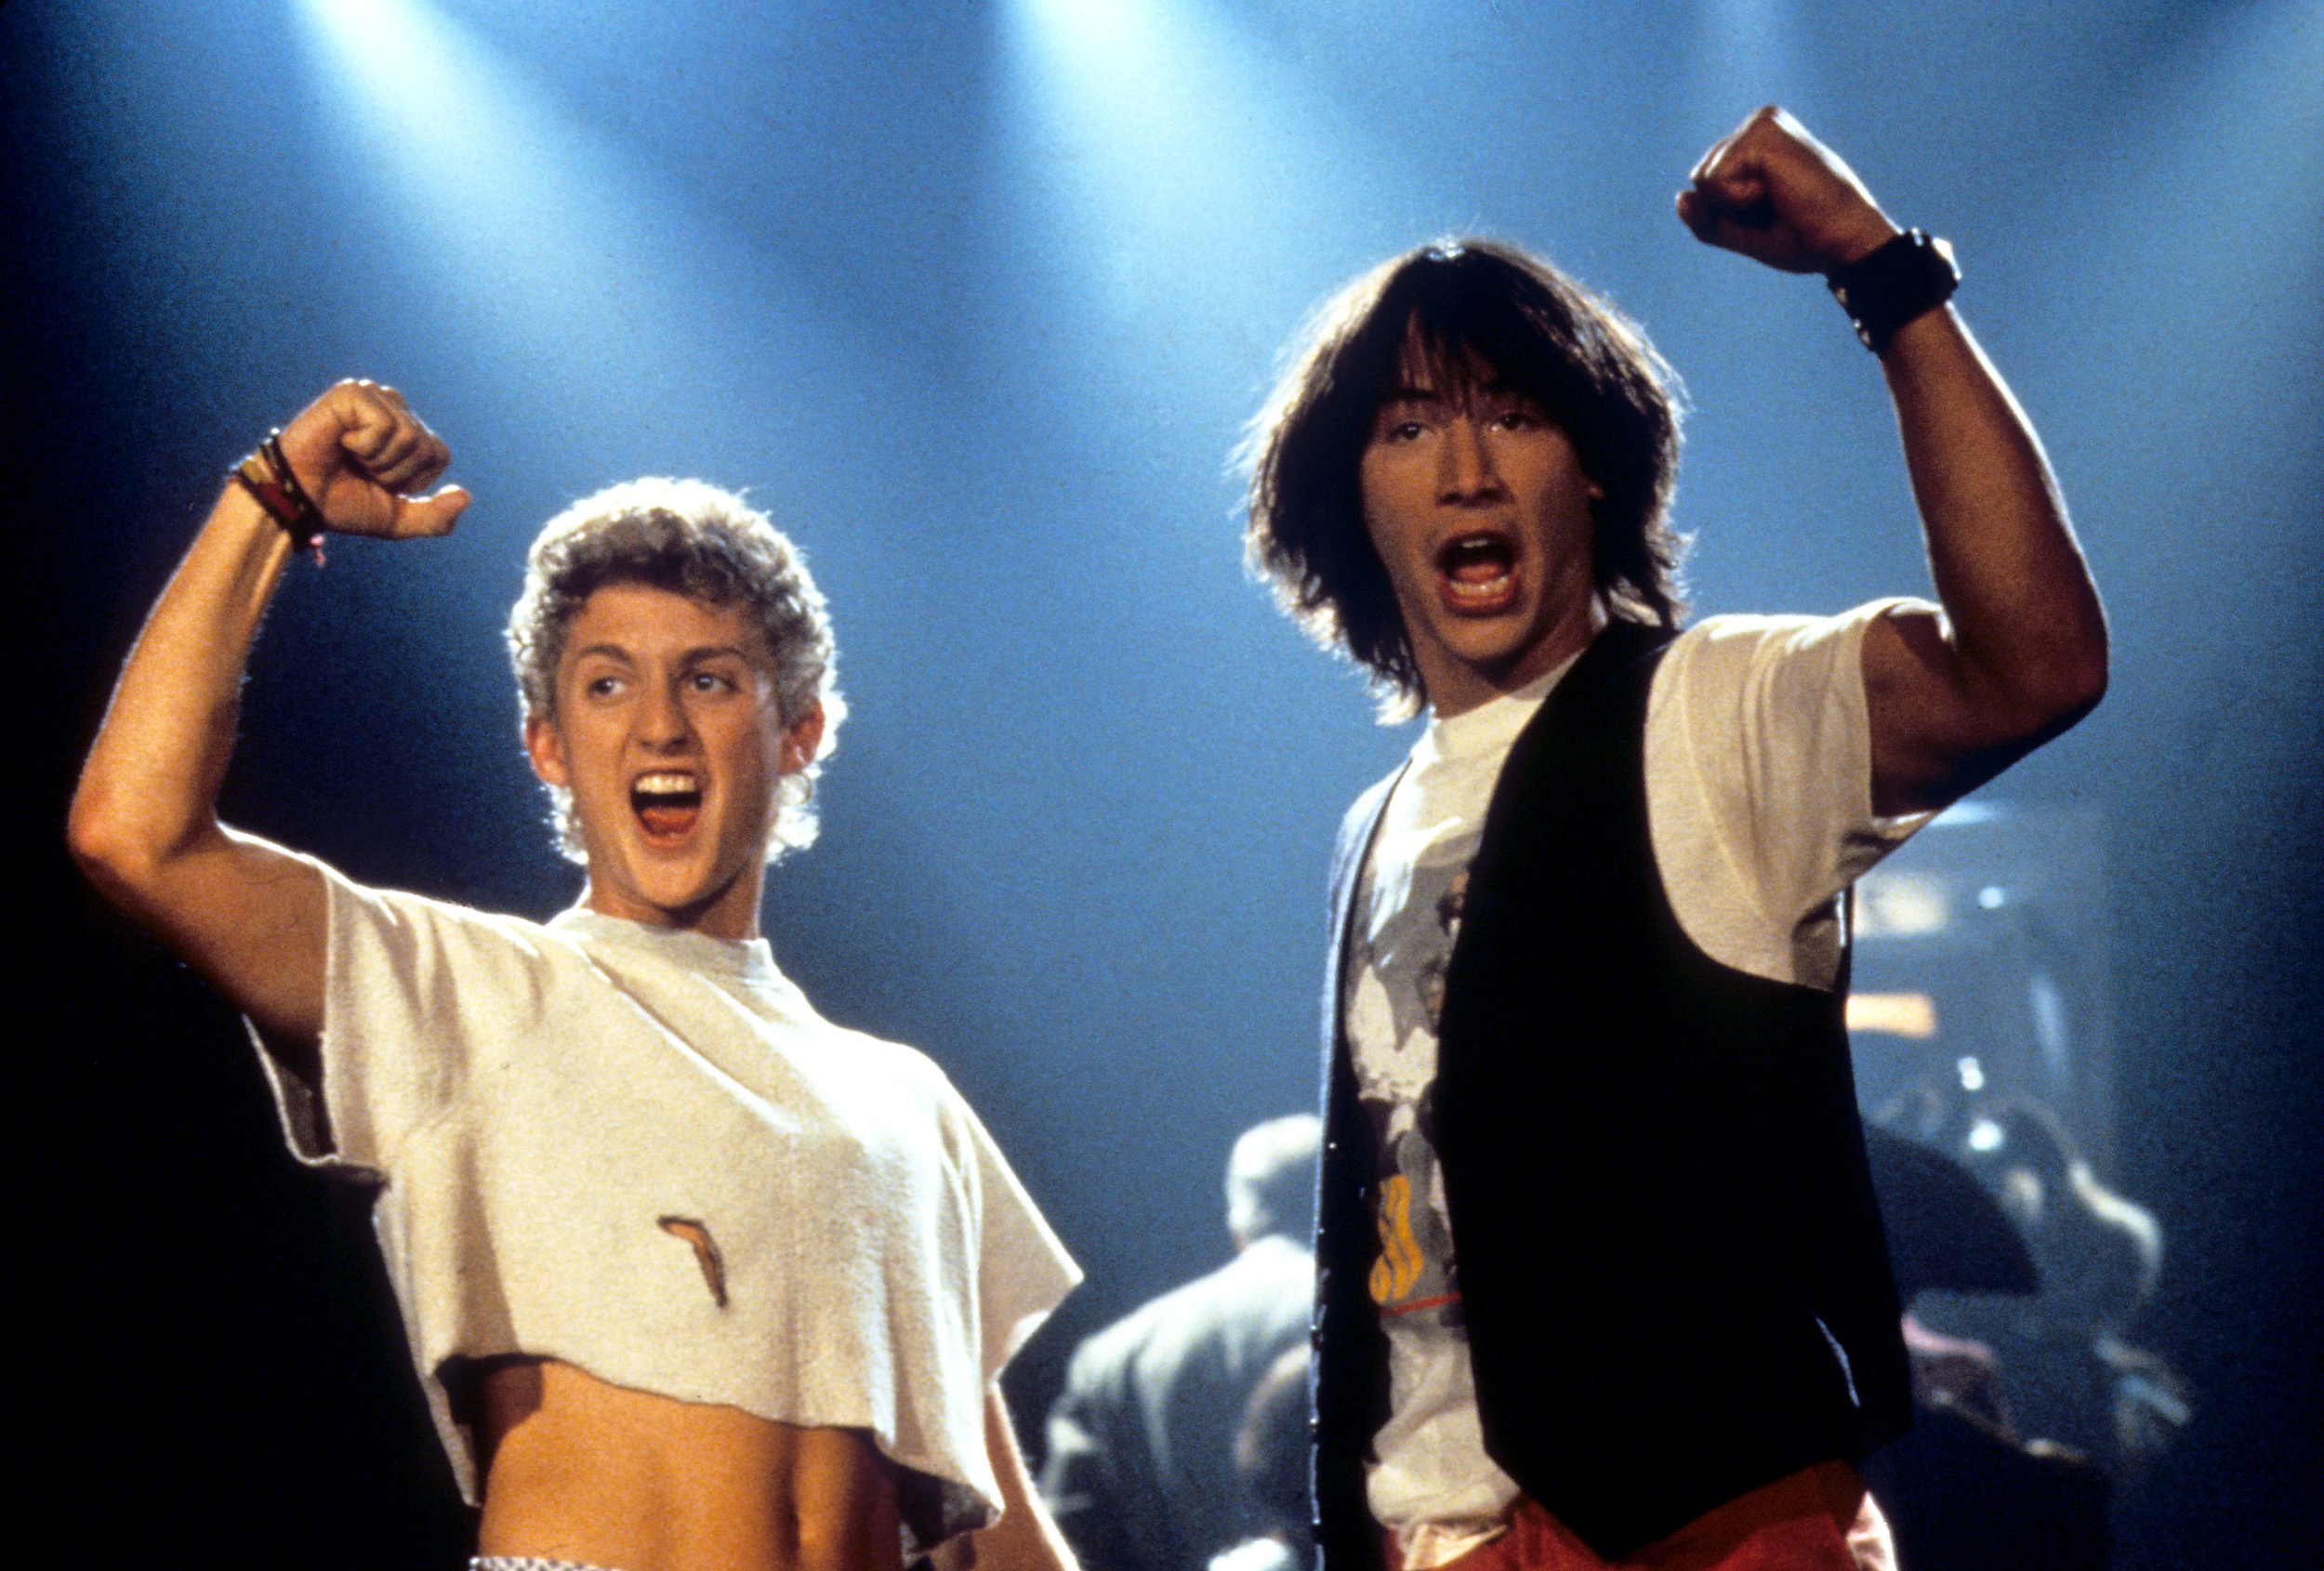 <p>Another film that spawned a trilogy. This comedy is on the sillier side. Bill and Ted are dimwitted high school students who use their time machine to collect important historical figures so they can avoid failing. One of the breakthrough roles for Keanu Reeves, it’s indeed most excellent.</p><p><a href='https://www.msn.com/en-us/community/channel/vid-cj9pqbr0vn9in2b6ddcd8sfgpfq6x6utp44fssrv6mc2gtybw0us'>Follow us on MSN to see more of our exclusive entertainment content.</a></p>